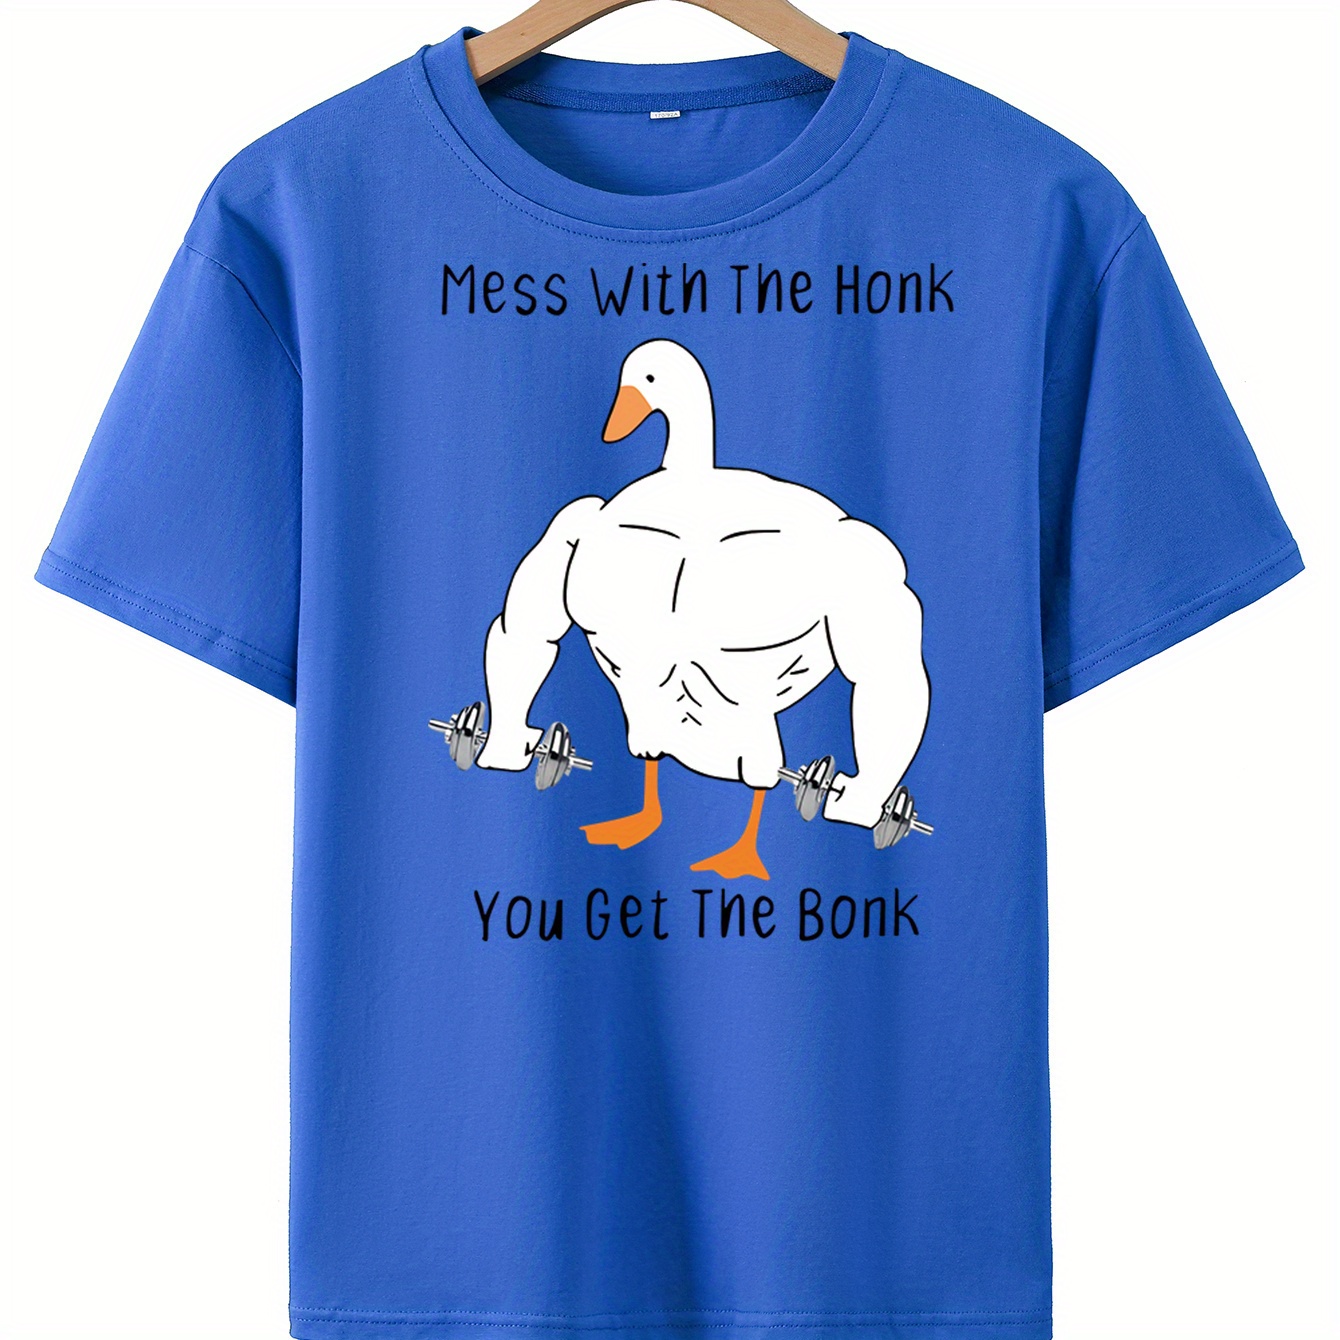 

Strong Duck Print T-shirt, Tees For Boys, Casual Short Sleeve T-shirt For Summer Spring Fall, Tops As Gifts